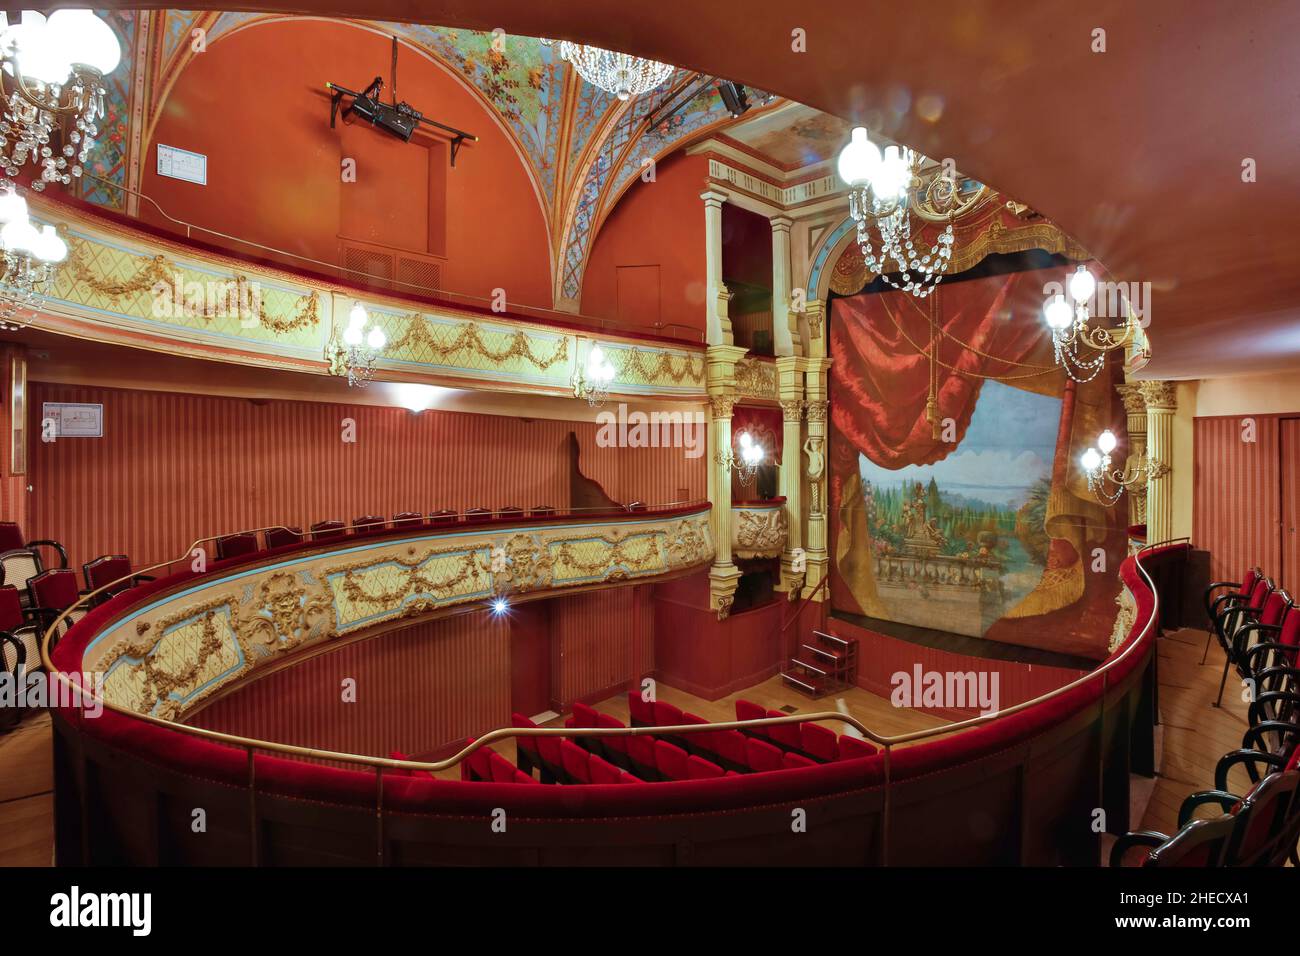 France, Herault, Pezenas, Pezenas theater, interior of an old theater Stock Photo